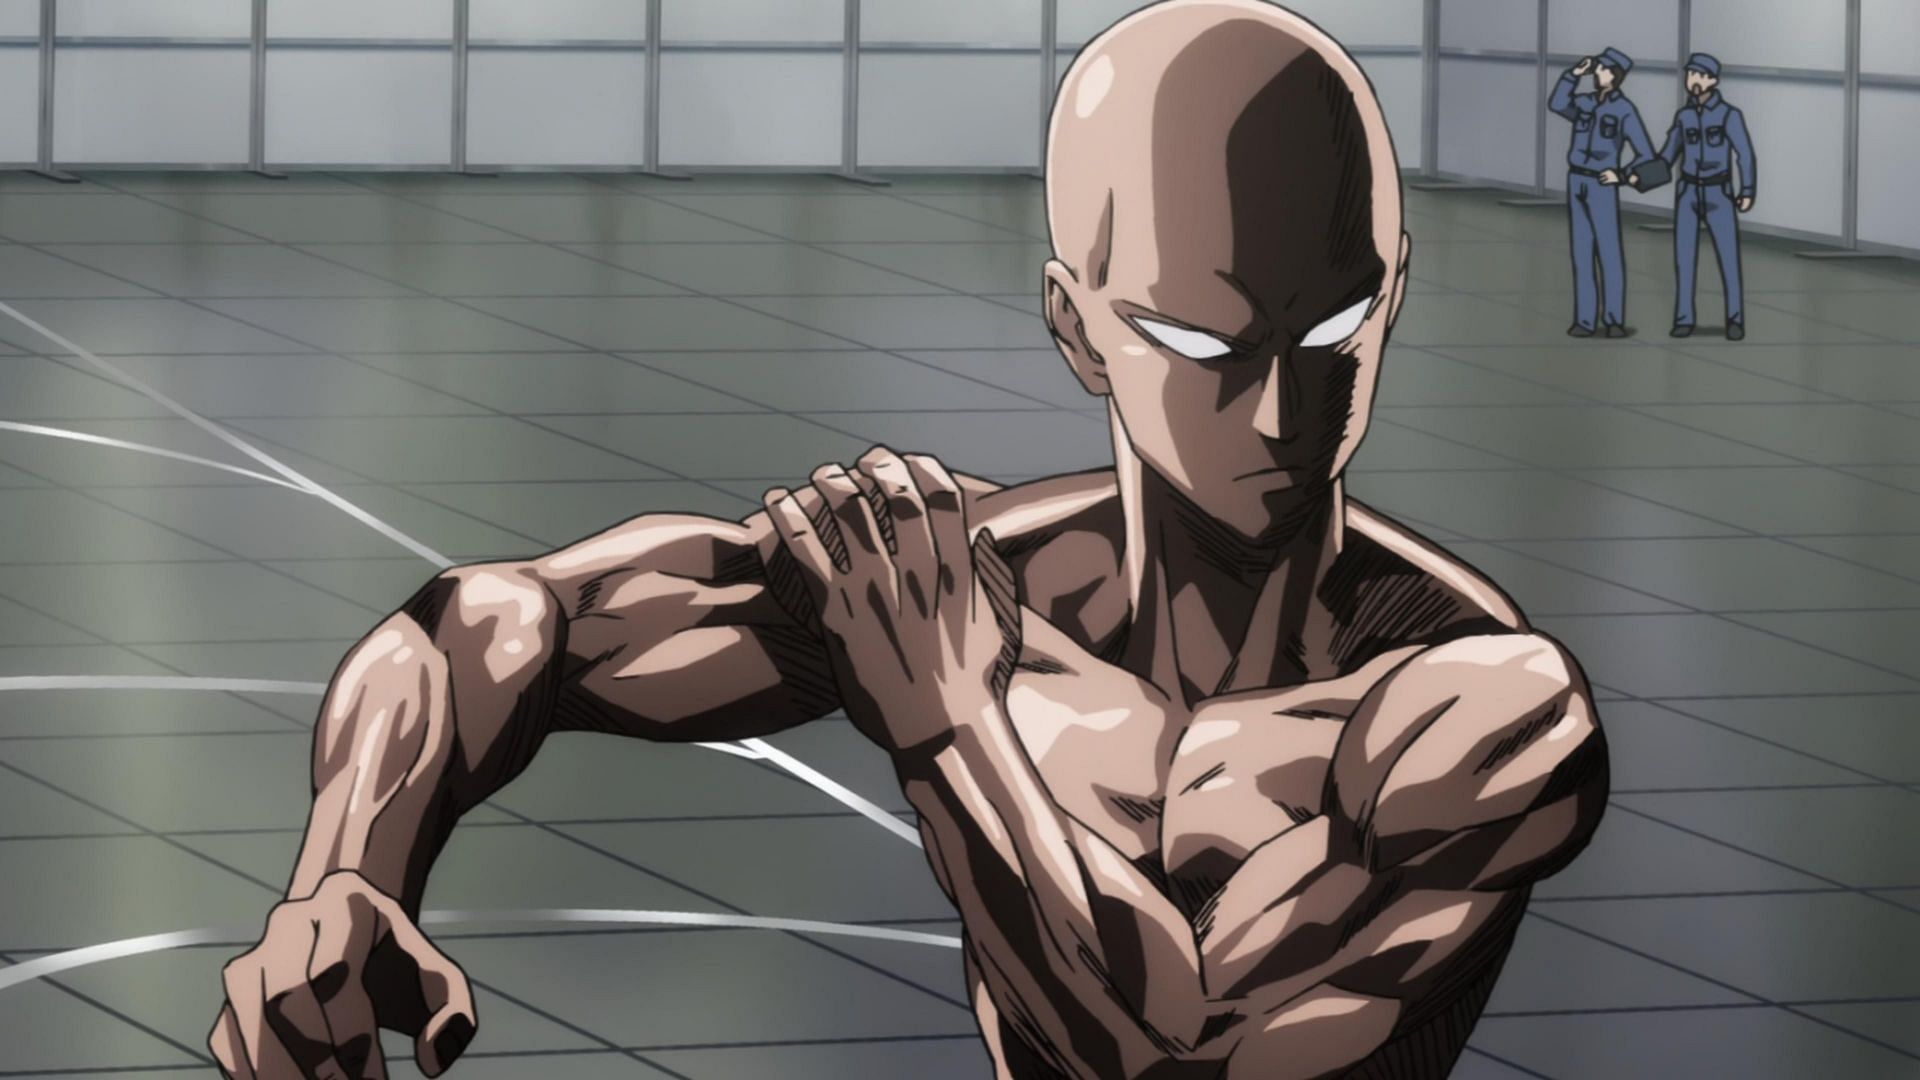 The Strong, One-Punch Man